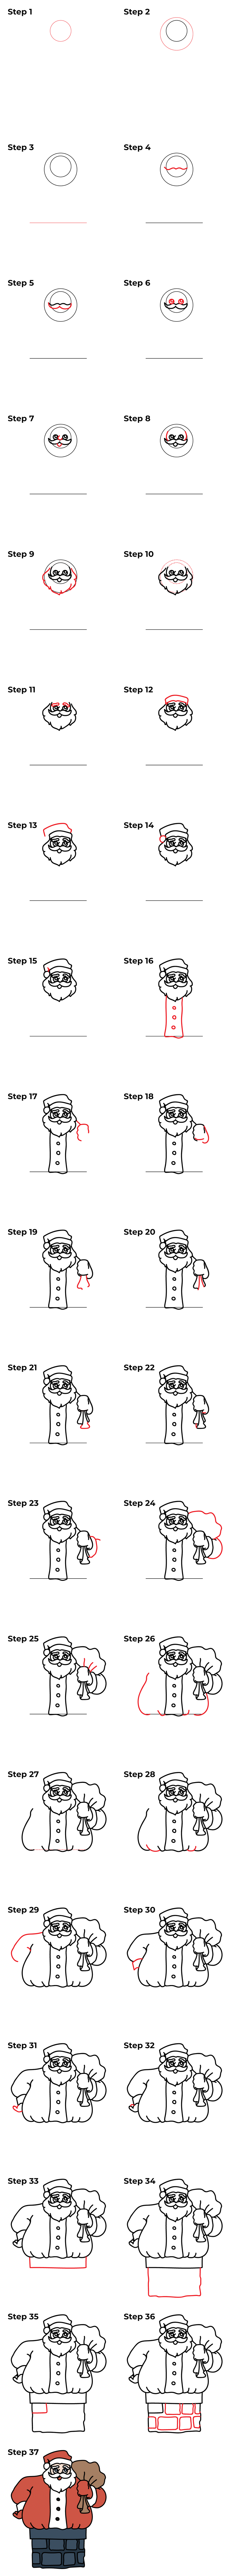 How to Draw  Santa Claus in a Chimney - Printable Tutorial